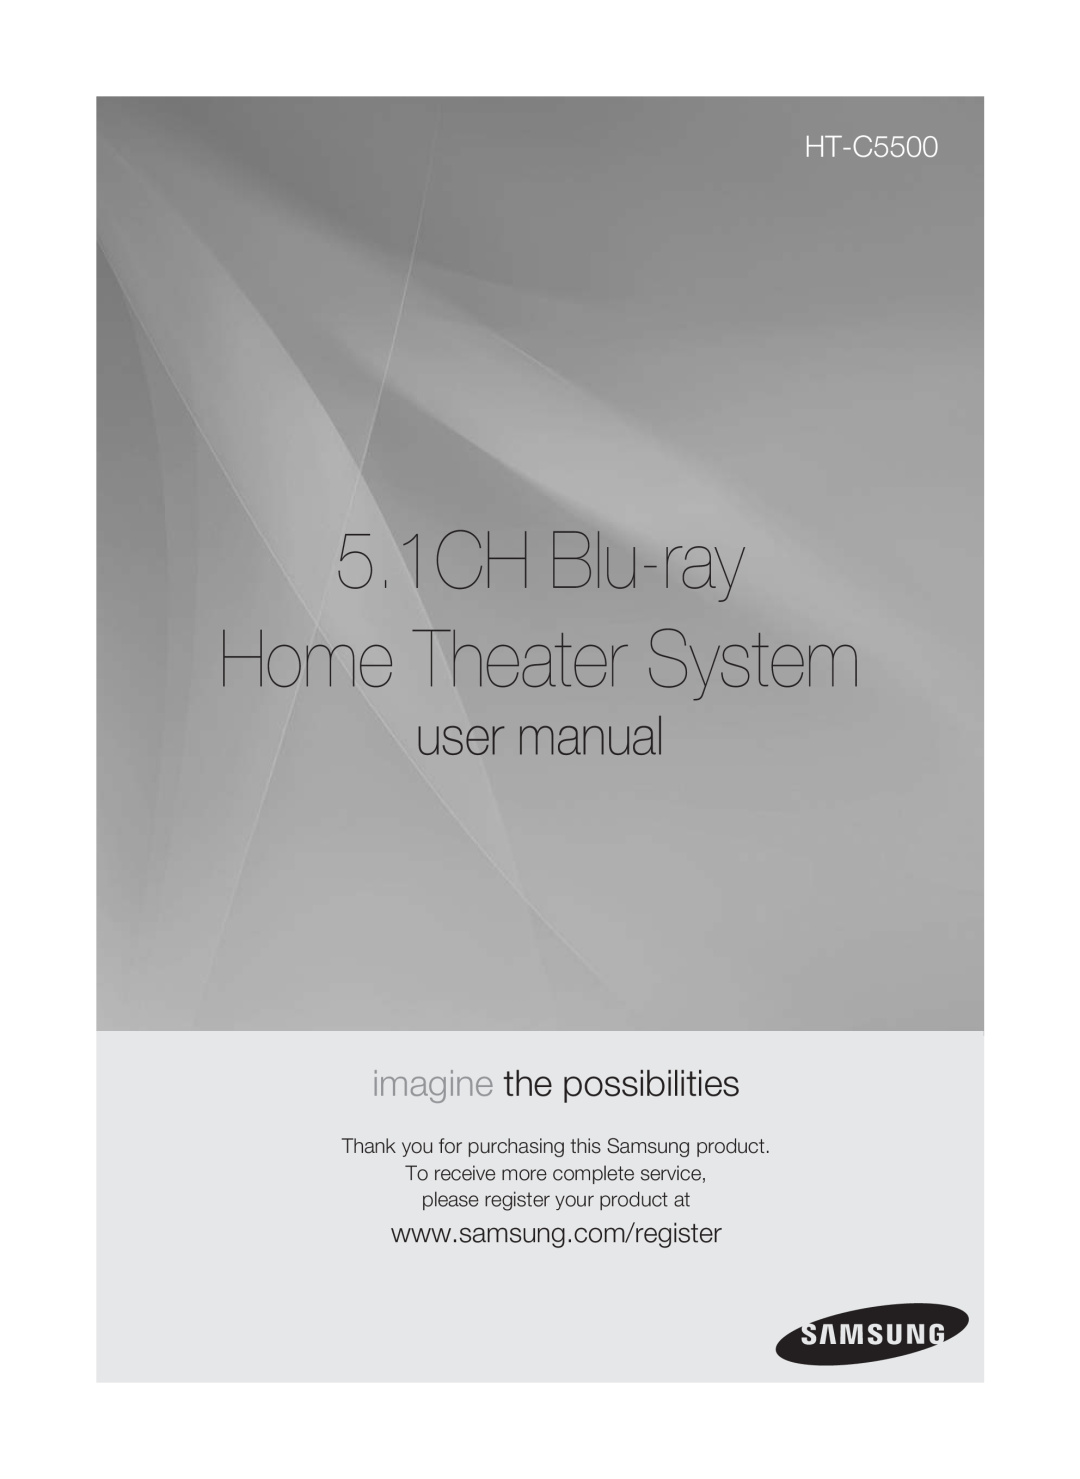 Samsung HT-C5500 user manual Thank you for purchasing this Samsung product, To receive more complete service 